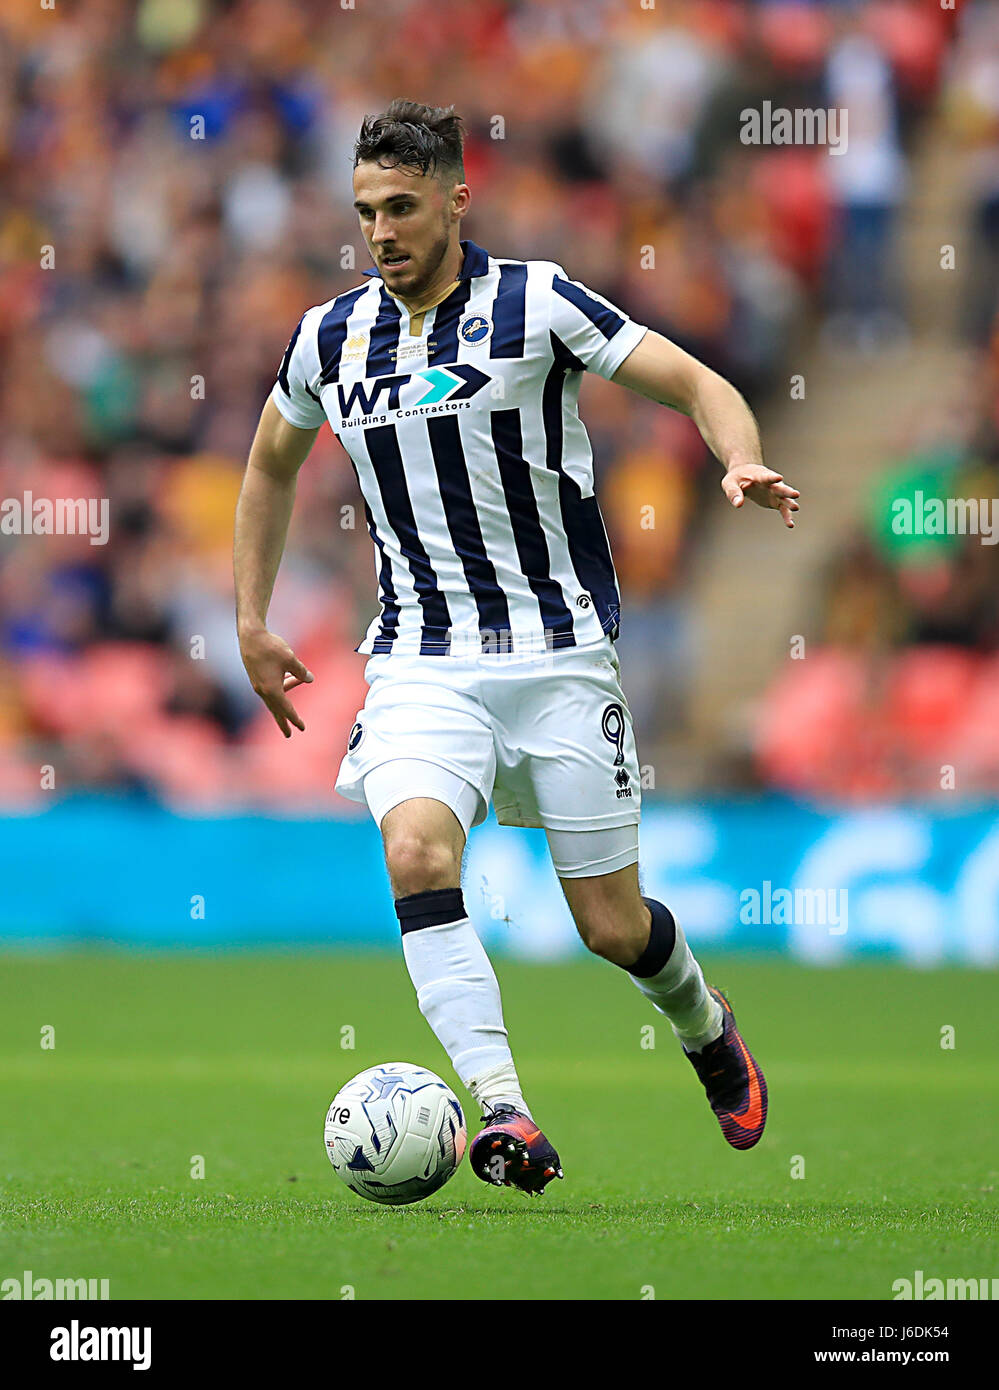 Millwall's Lee Gregory in action during the Sky Bet League One play off final at Wembley Stadium, London. PRESS ASSOCIATION Photo. Picture date: Saturday May 20, 2017. See PA story SOCCER Final. Photo credit should read: Mike Egerton/PA Wire. RESTRICTIONS: No use with unauthorised audio, video, data, fixture lists, club/league logos or 'live' services. Online in-match use limited to 75 images, no video emulation. No use in betting, games or single club/league/player publications. Stock Photo